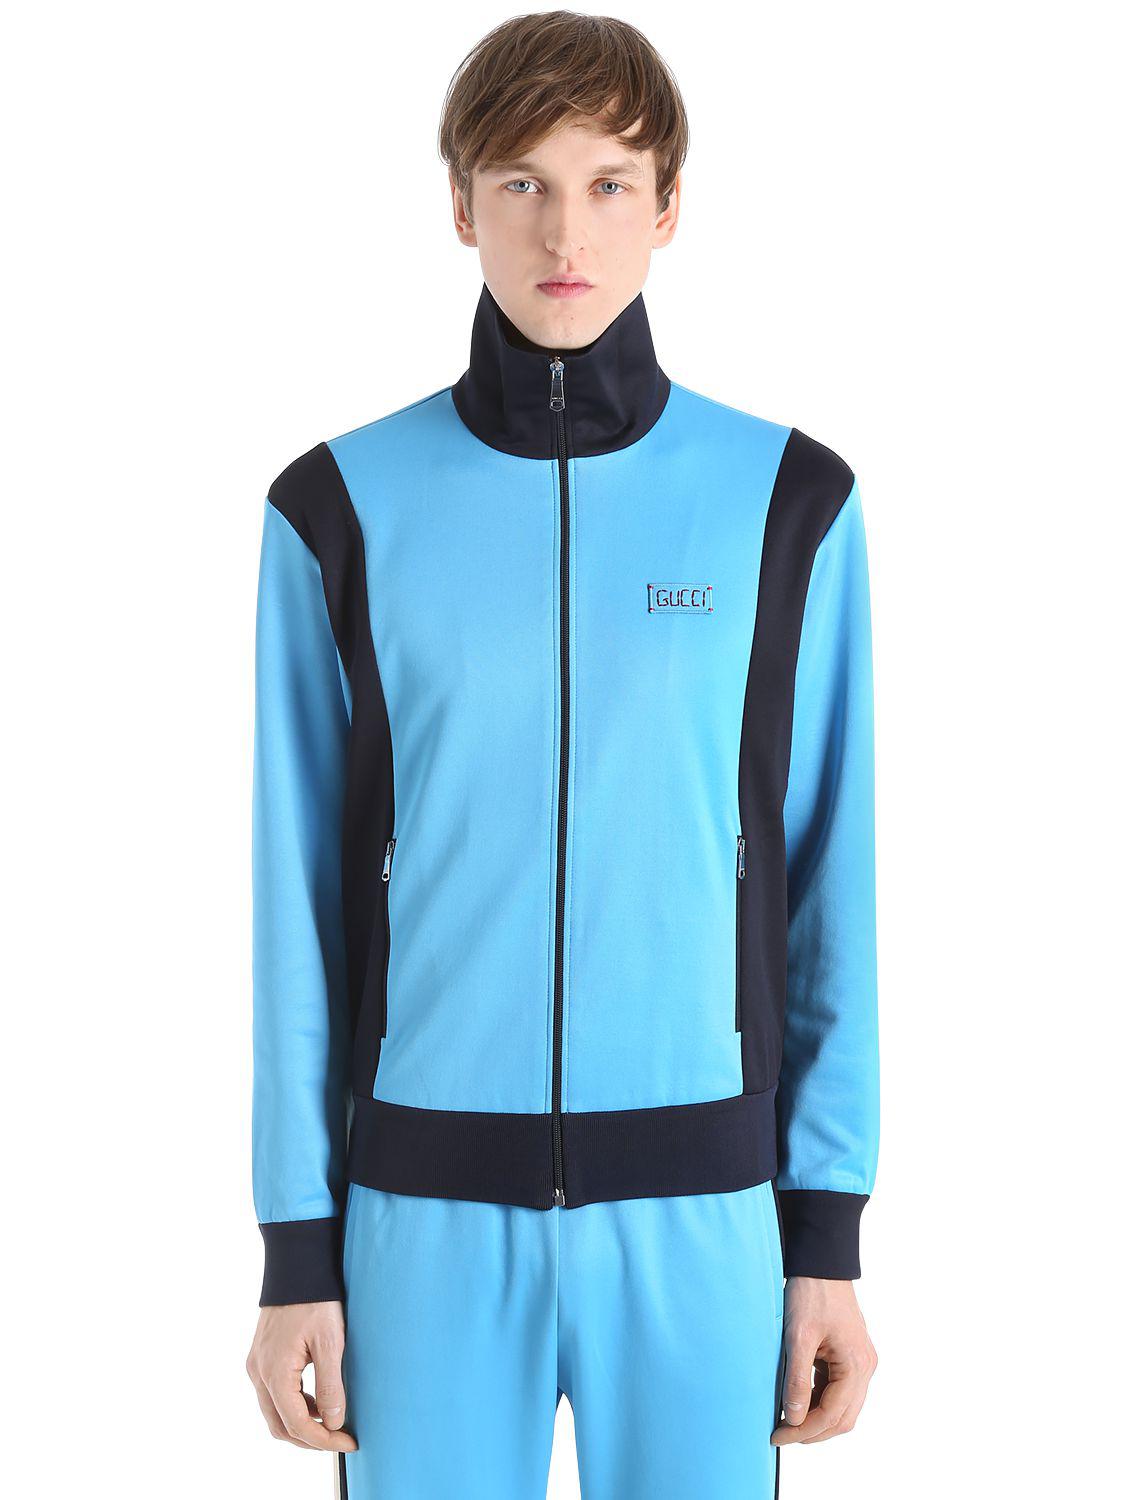 Gucci Tiger Patch Jersey Zip-up Sweatshirt in Blue for Men | Lyst